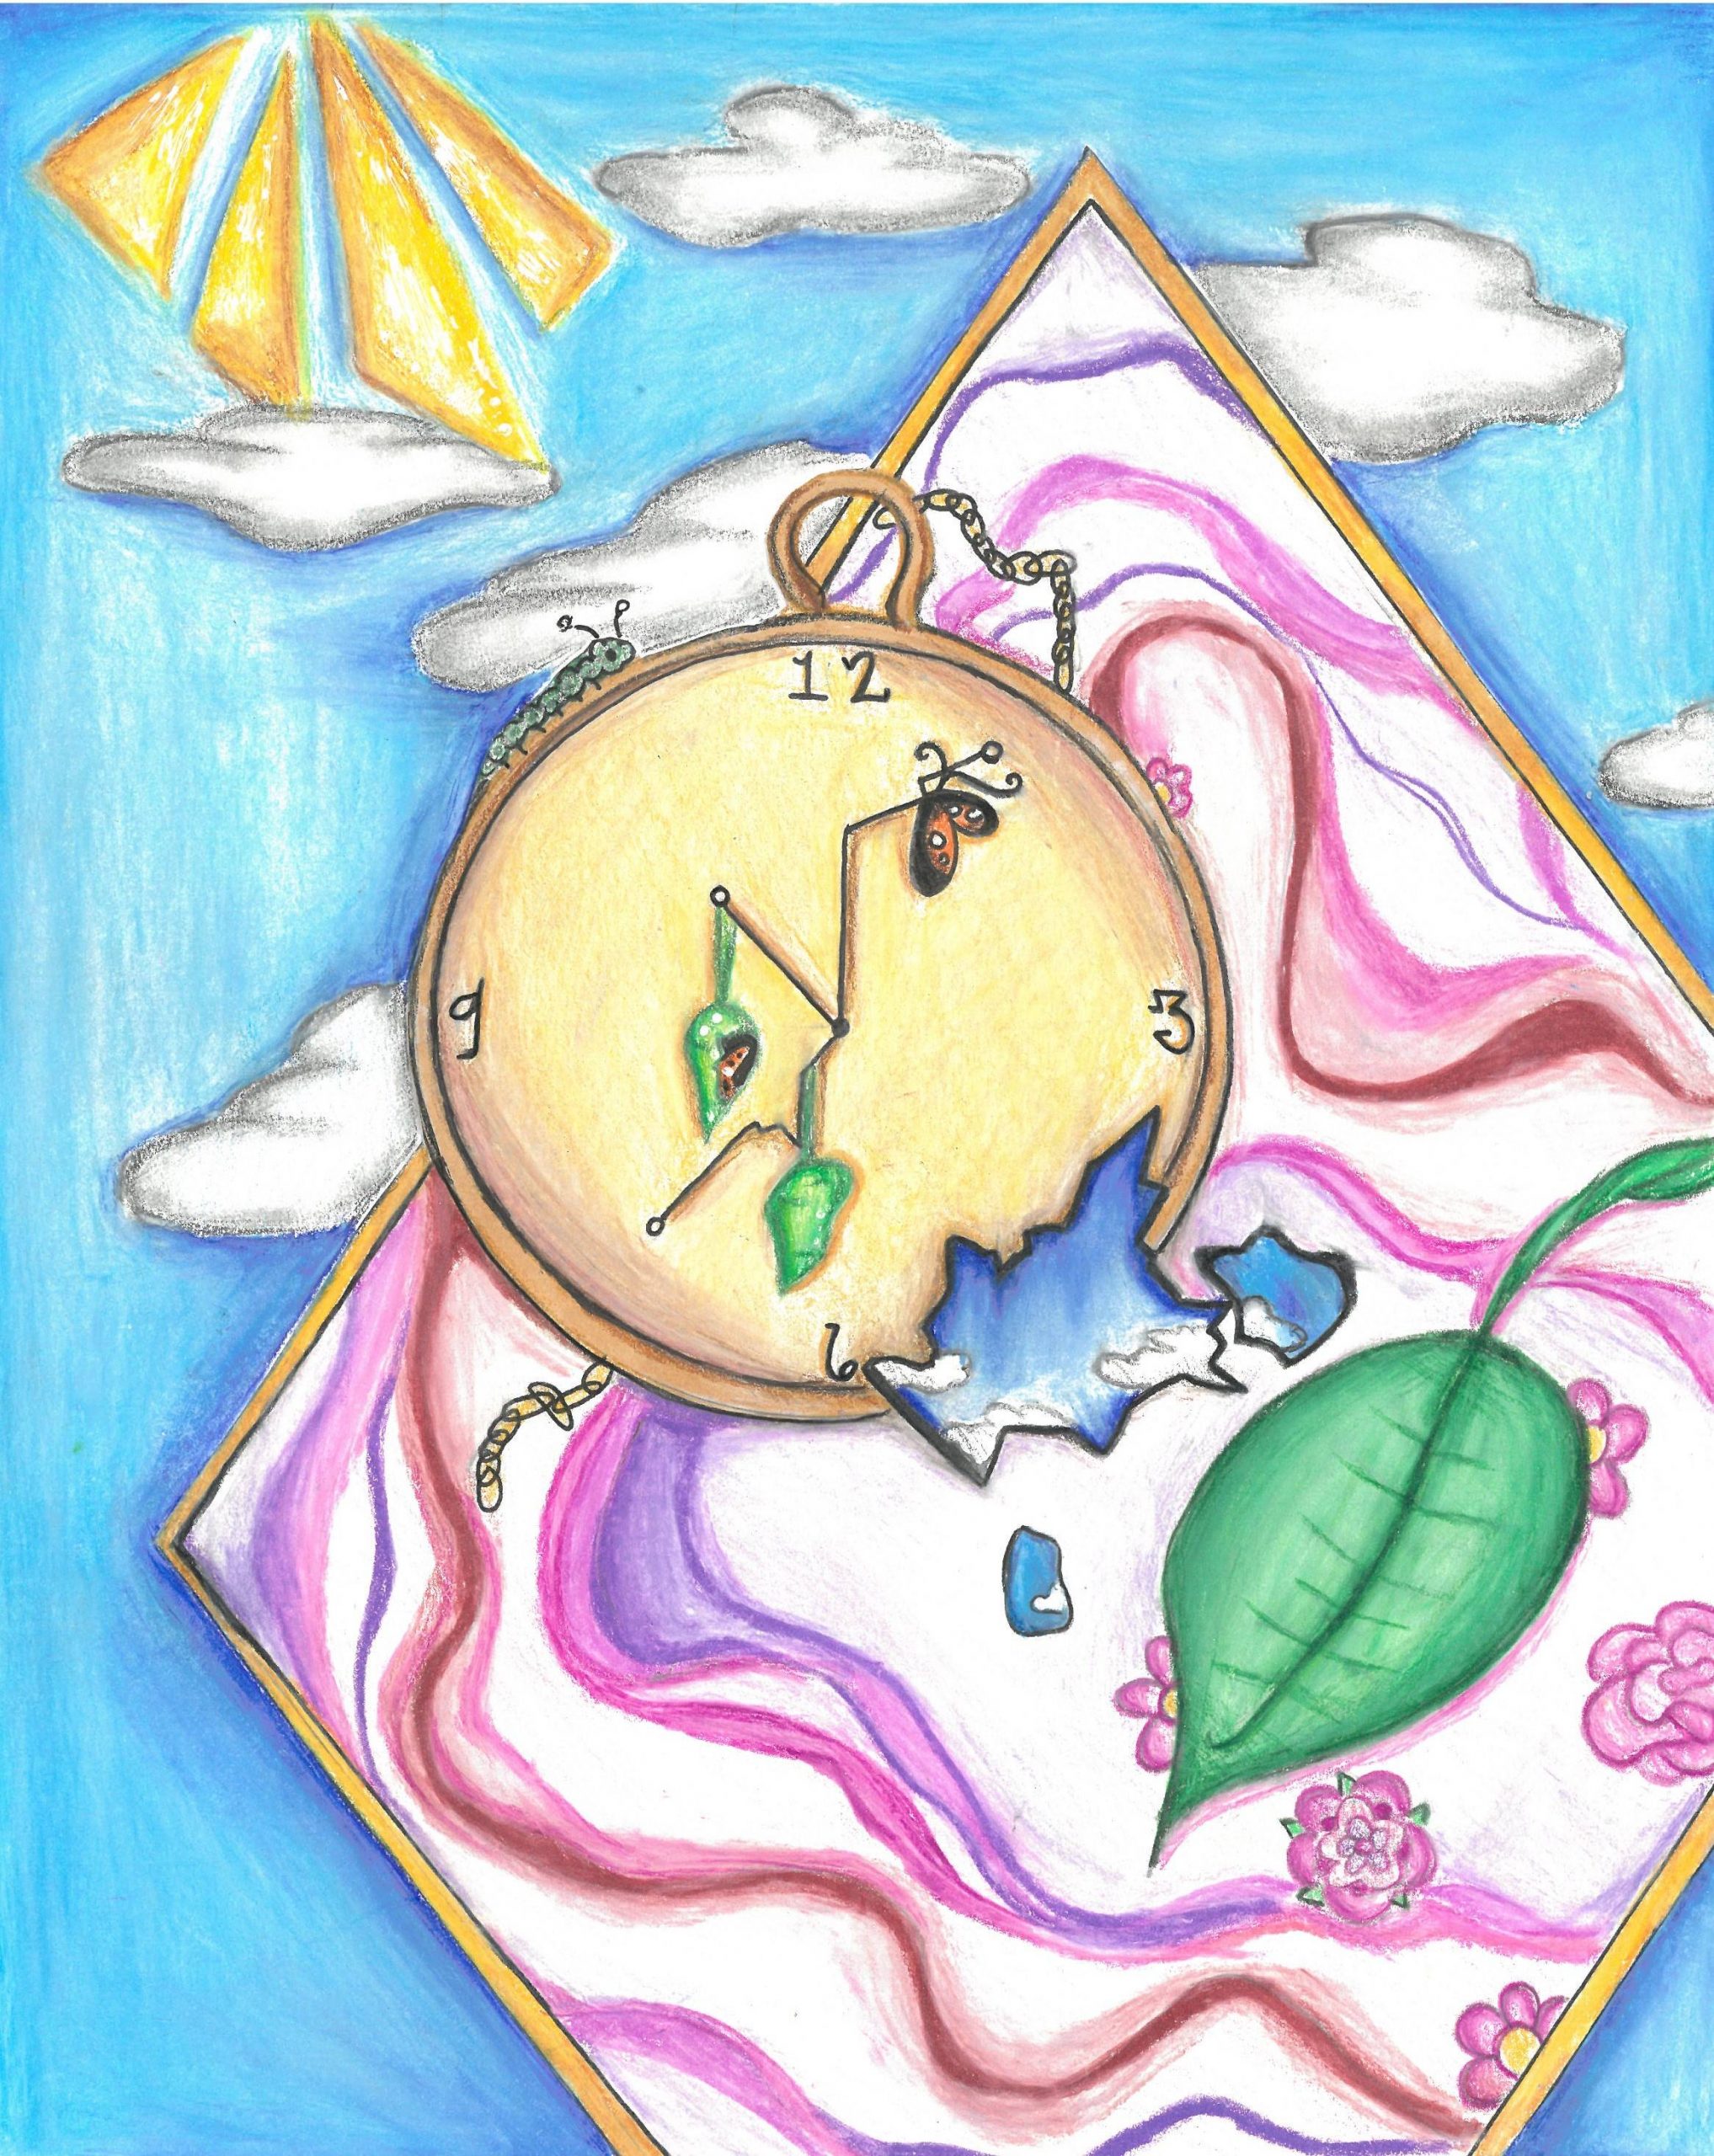 Drawing of clock in front of pink diamond shape